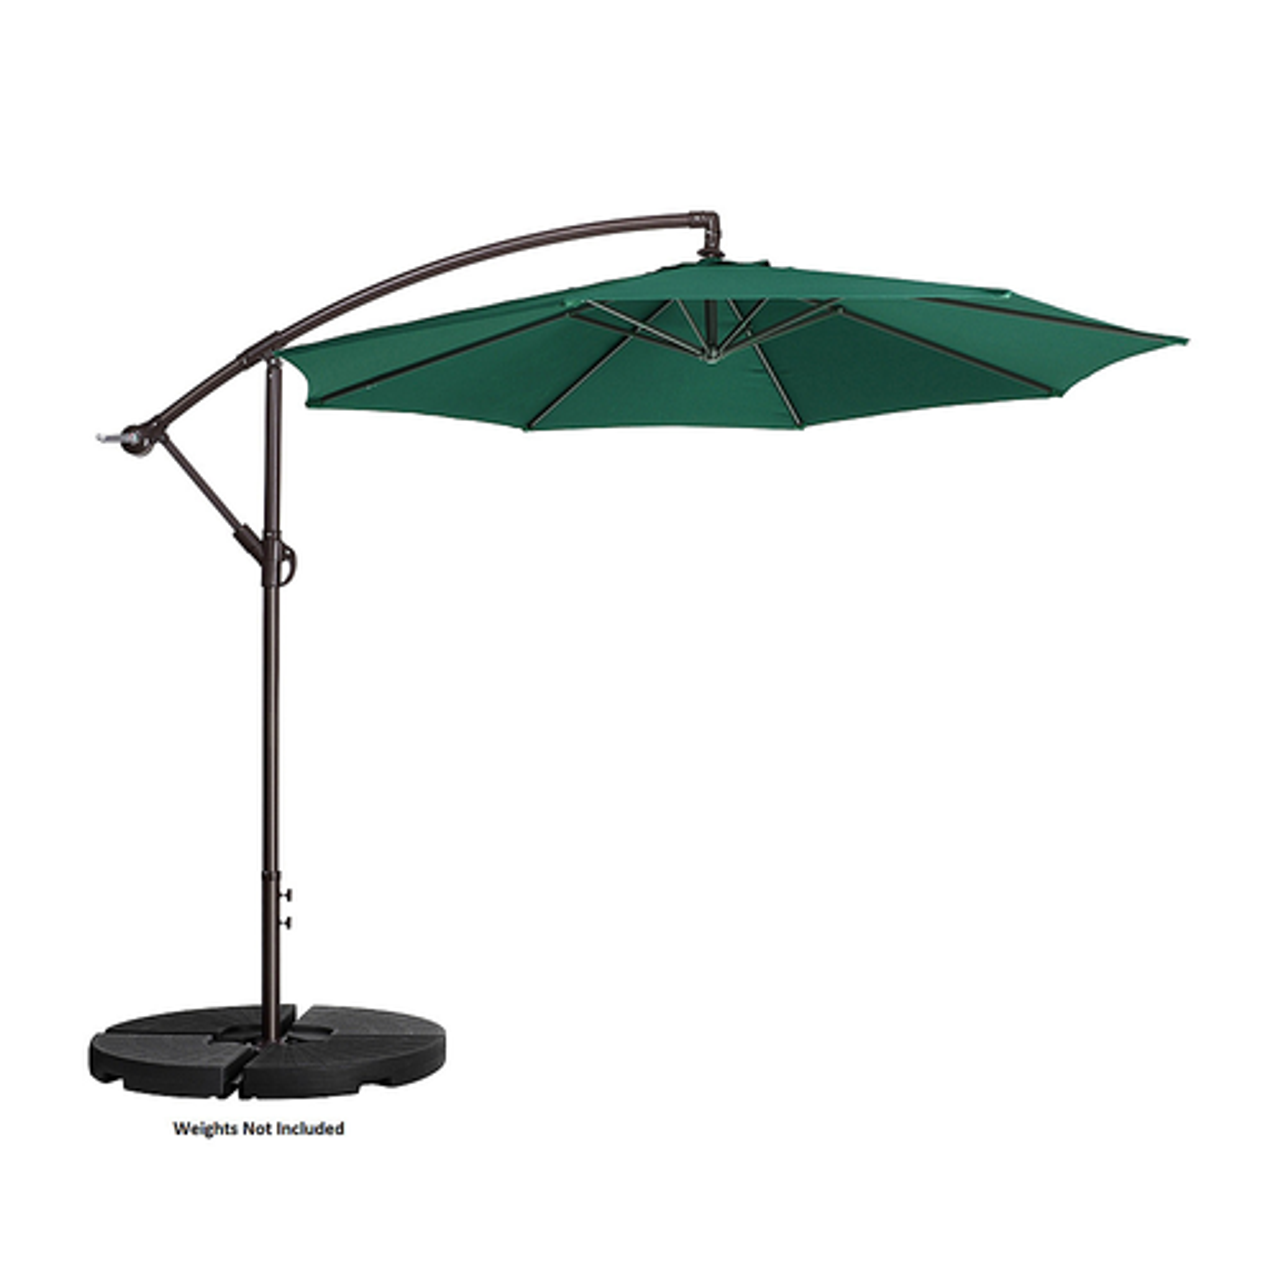 10' Offset Outdoor Patio Umbrella with 8 Steel Ribs and Vertical Tilt by Nature Spring (Green) - Green